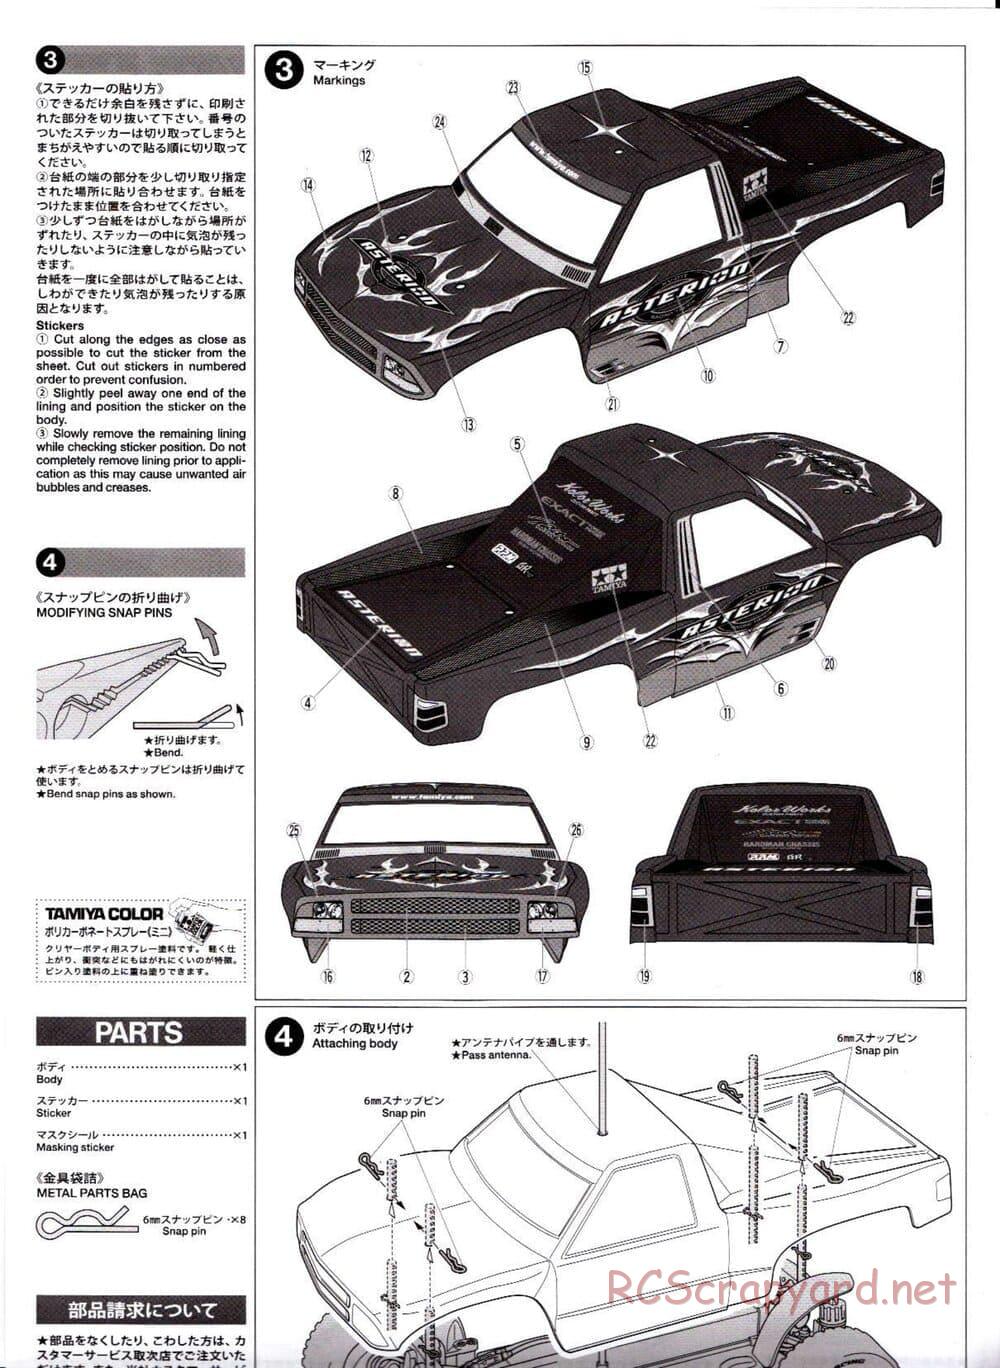 Tamiya - Asterion - XV-01T Chassis - Body Manual - Page 3